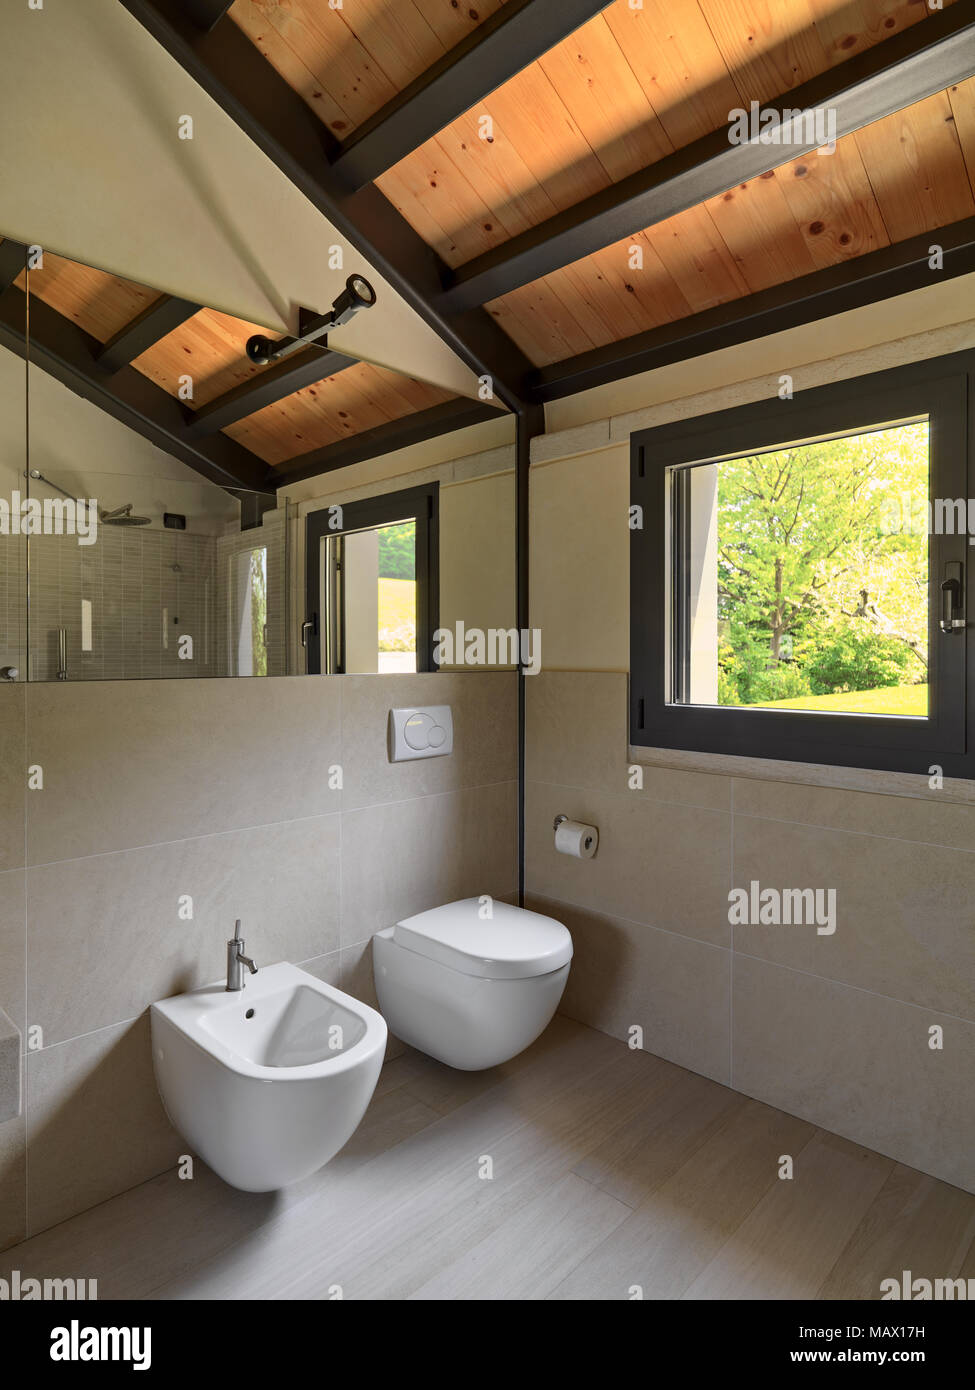 interiors shots of a modern bathroom, in the foreground the toilet bowl and the bidet the floor is made of wood Stock Photo